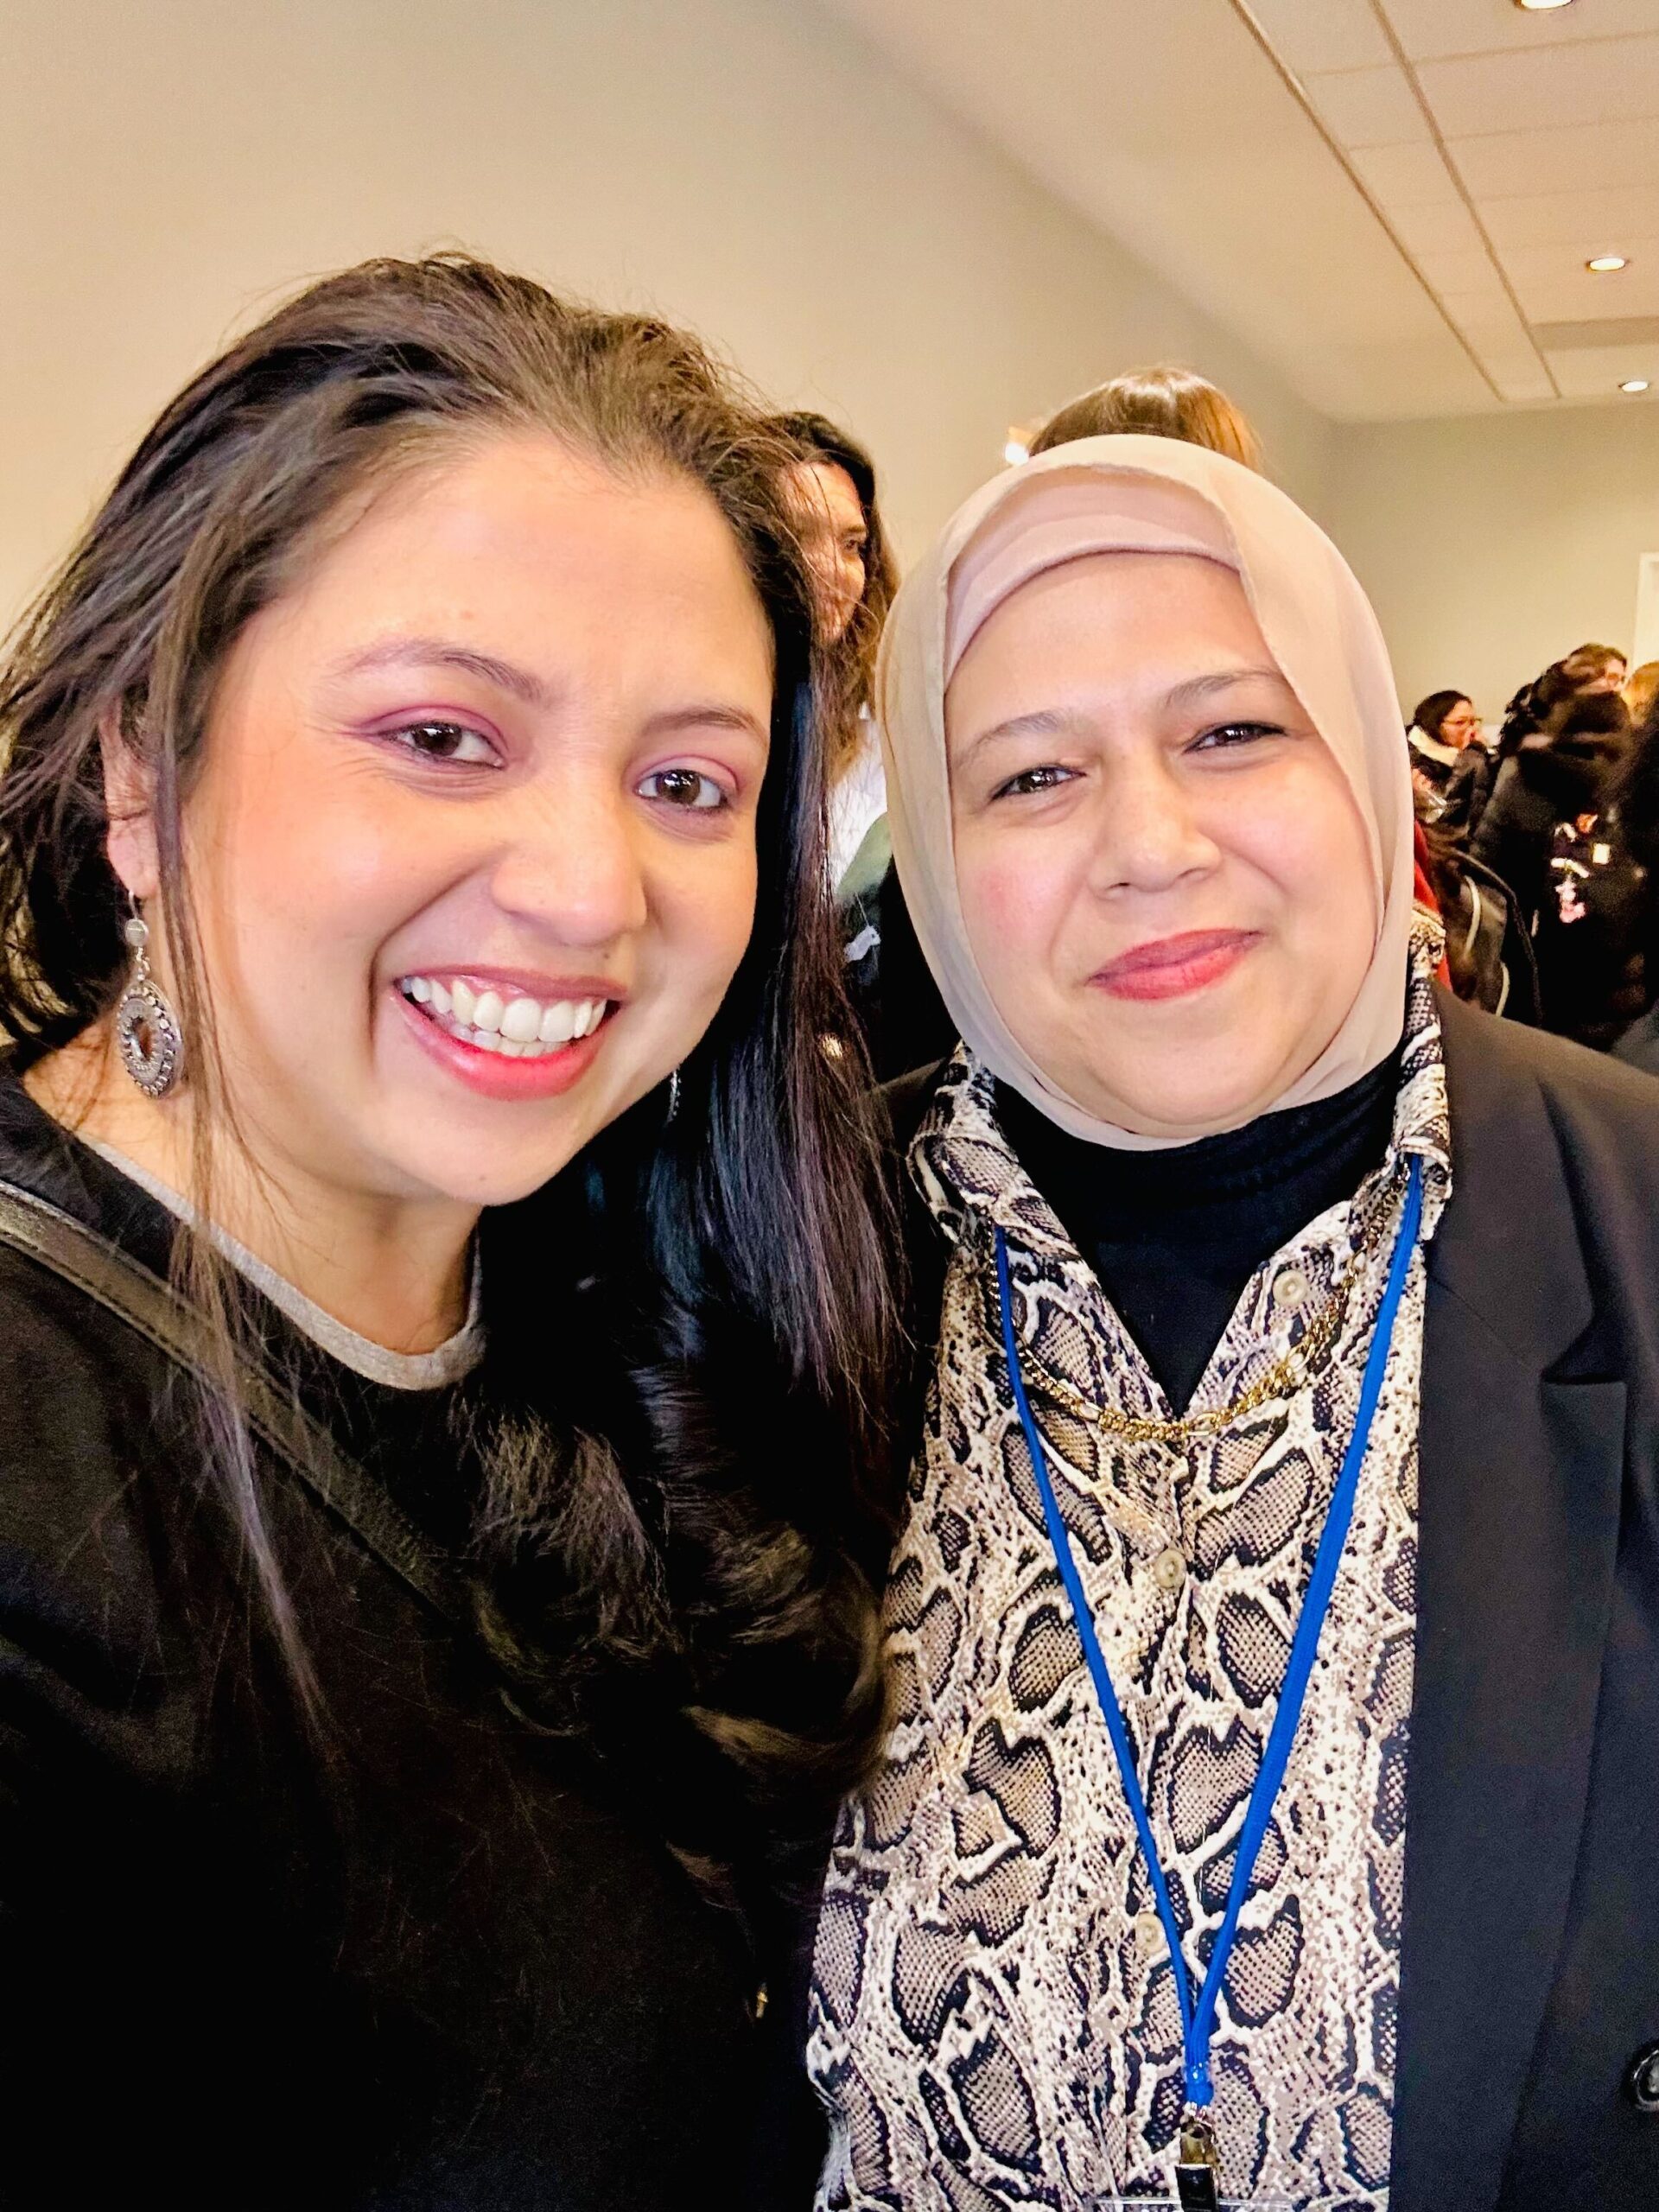 WEA's Annesha Chowdhury and Muna Luqman—Yemeni peace activist and advocate for human rights, Co-Founder of the Women's Solidarity Network, Chairperson of Food For Humanity, and member of the Women’s Alliance for Security Leadership.